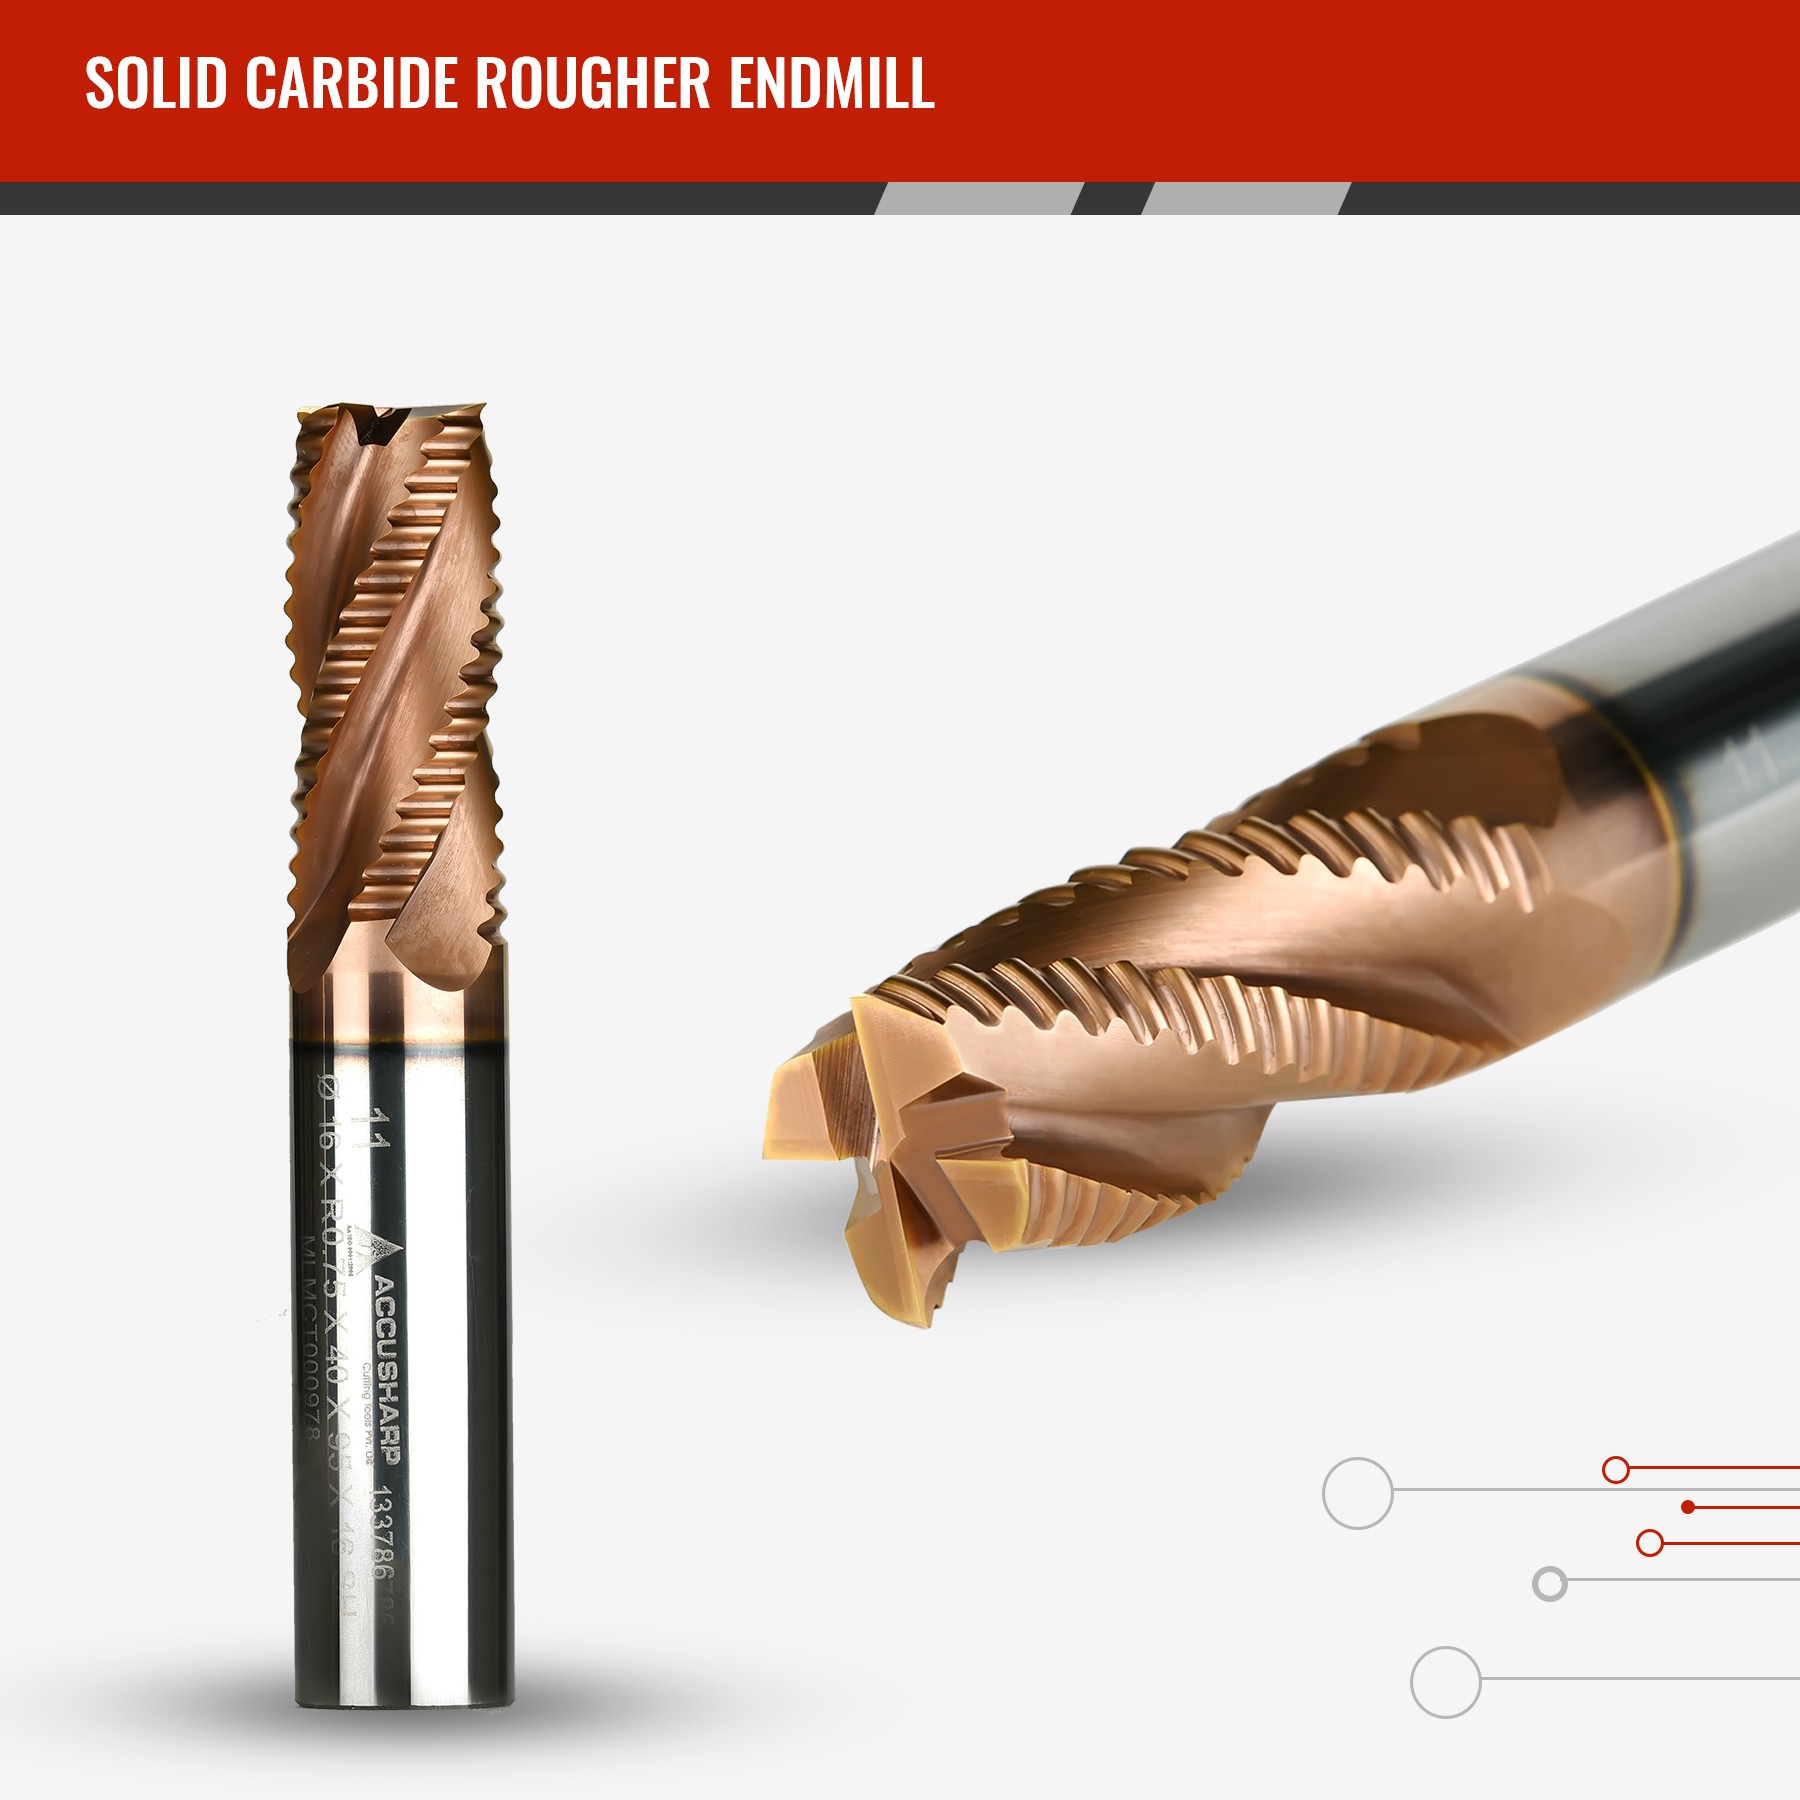 Solid Carbide Rougher Endmill